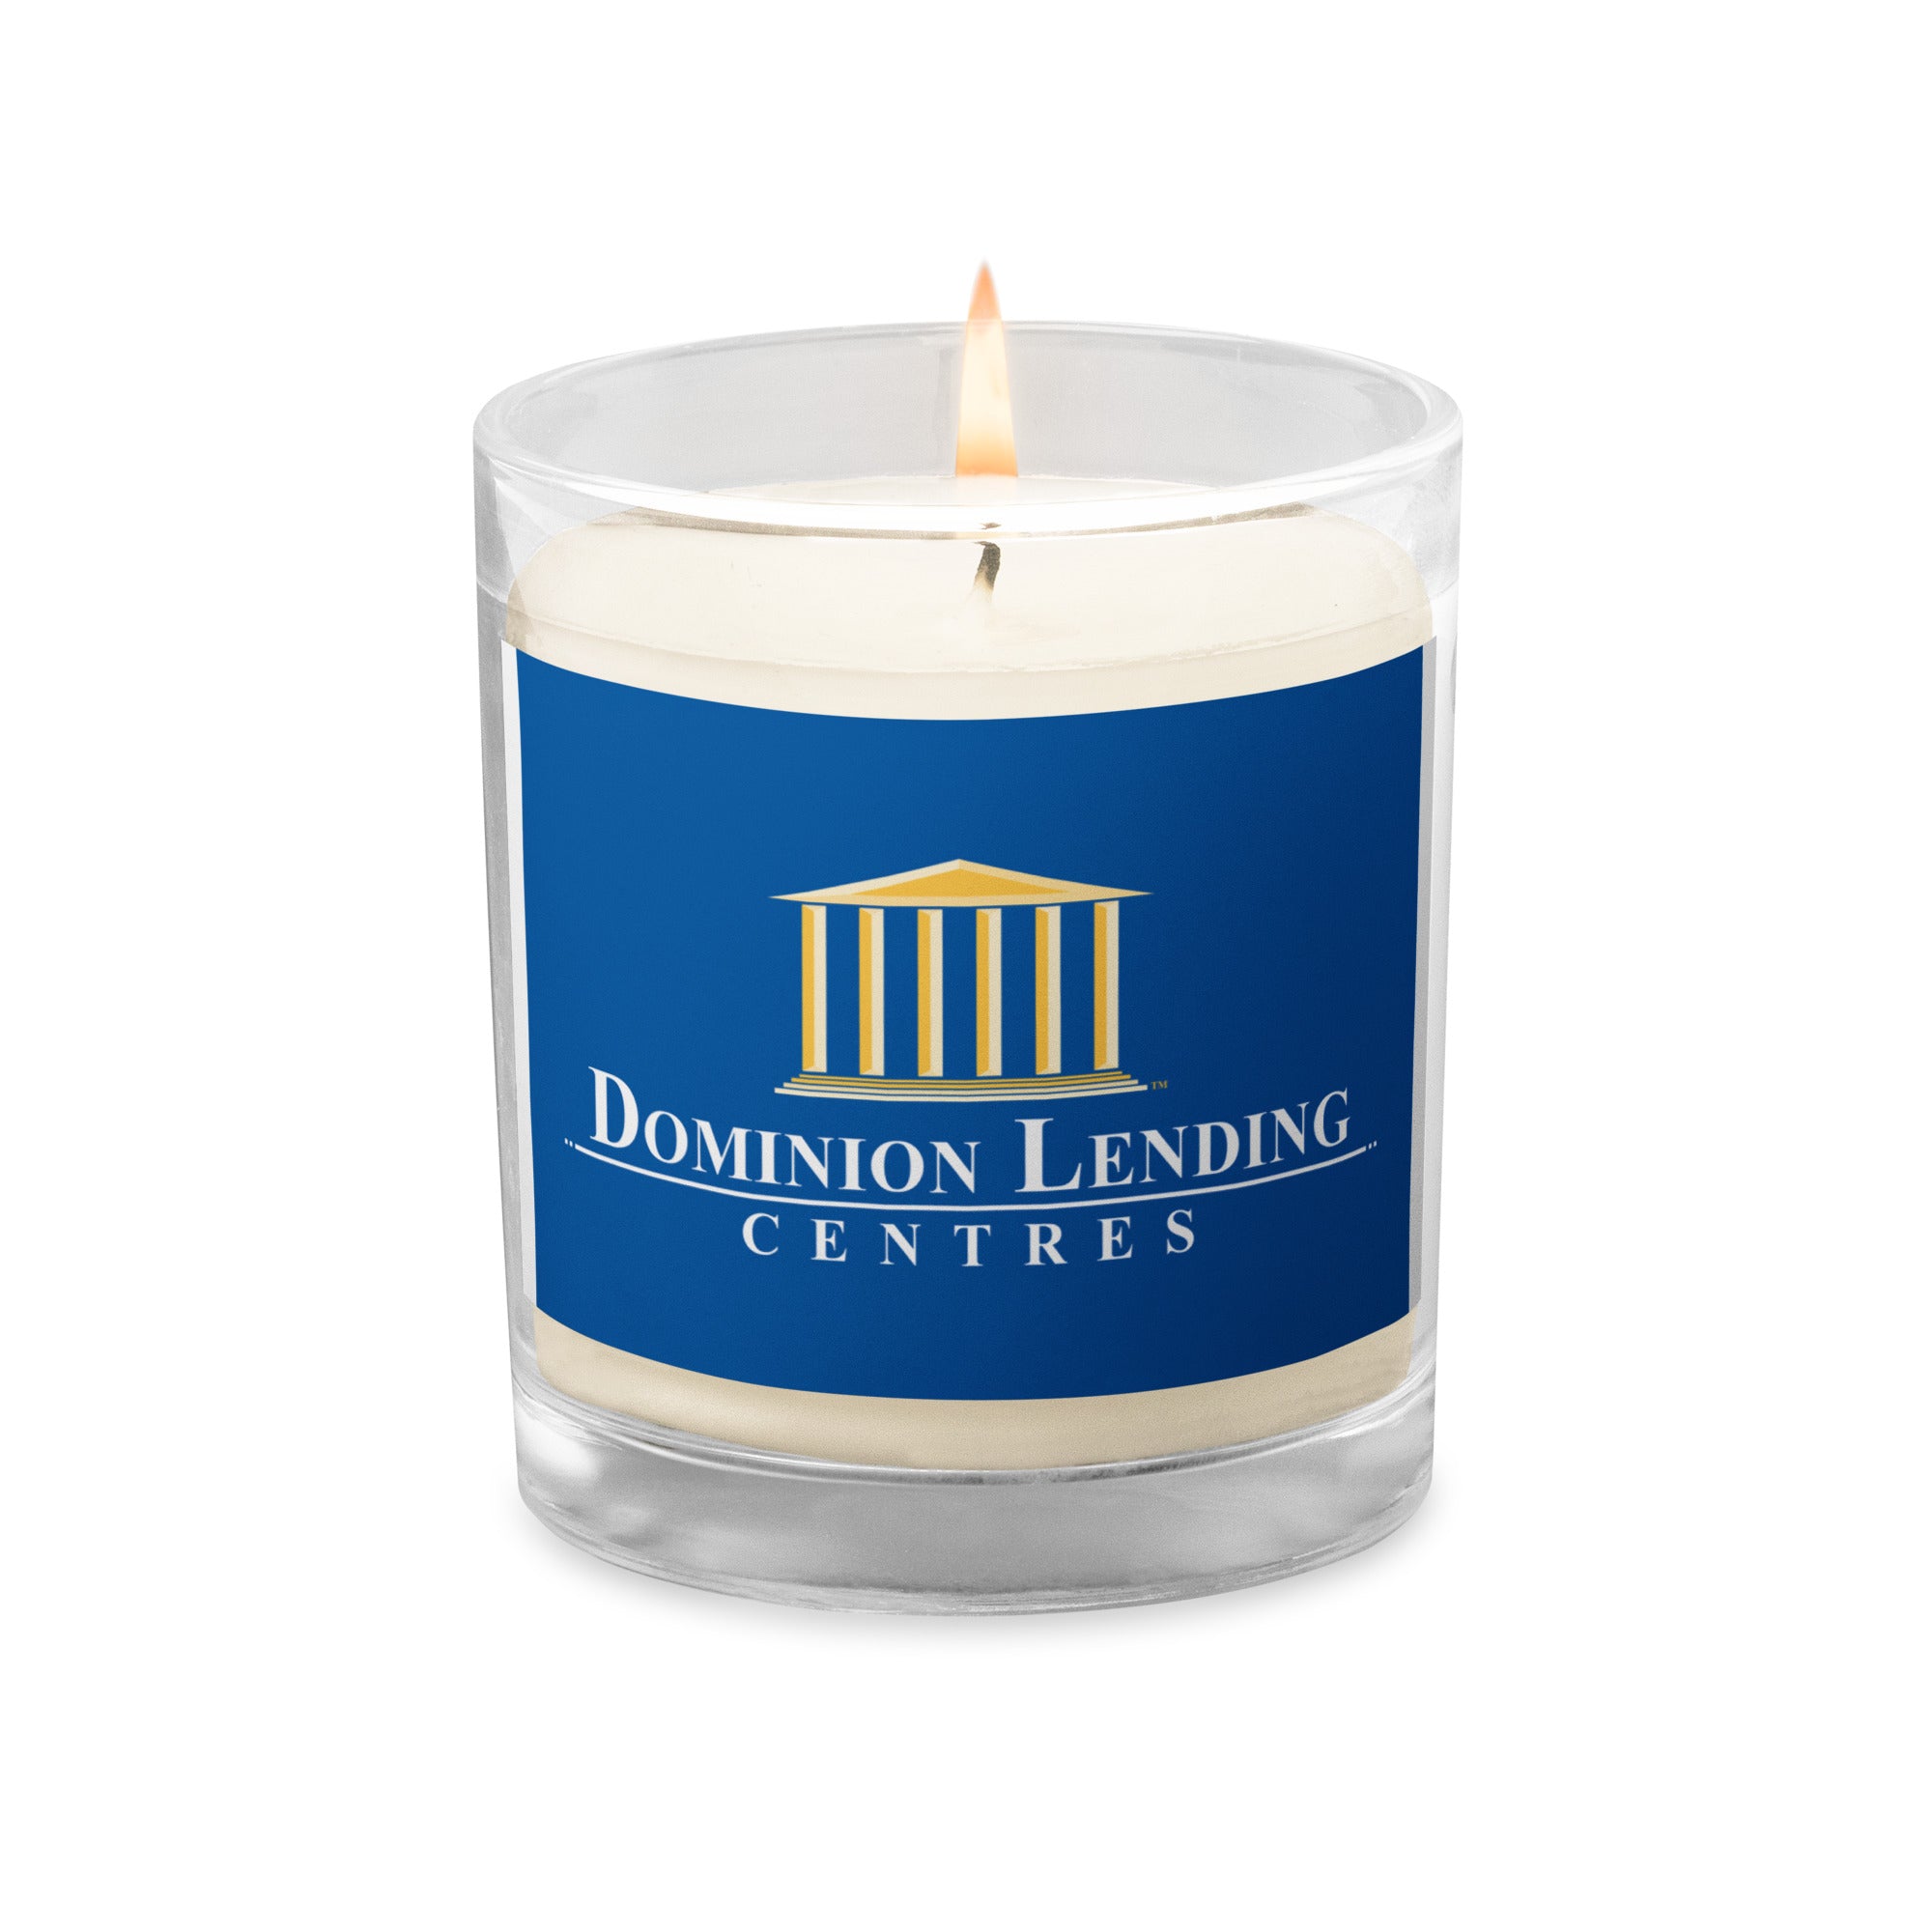 Dominion Lending Centres Glass Jar Soy Wax Candle